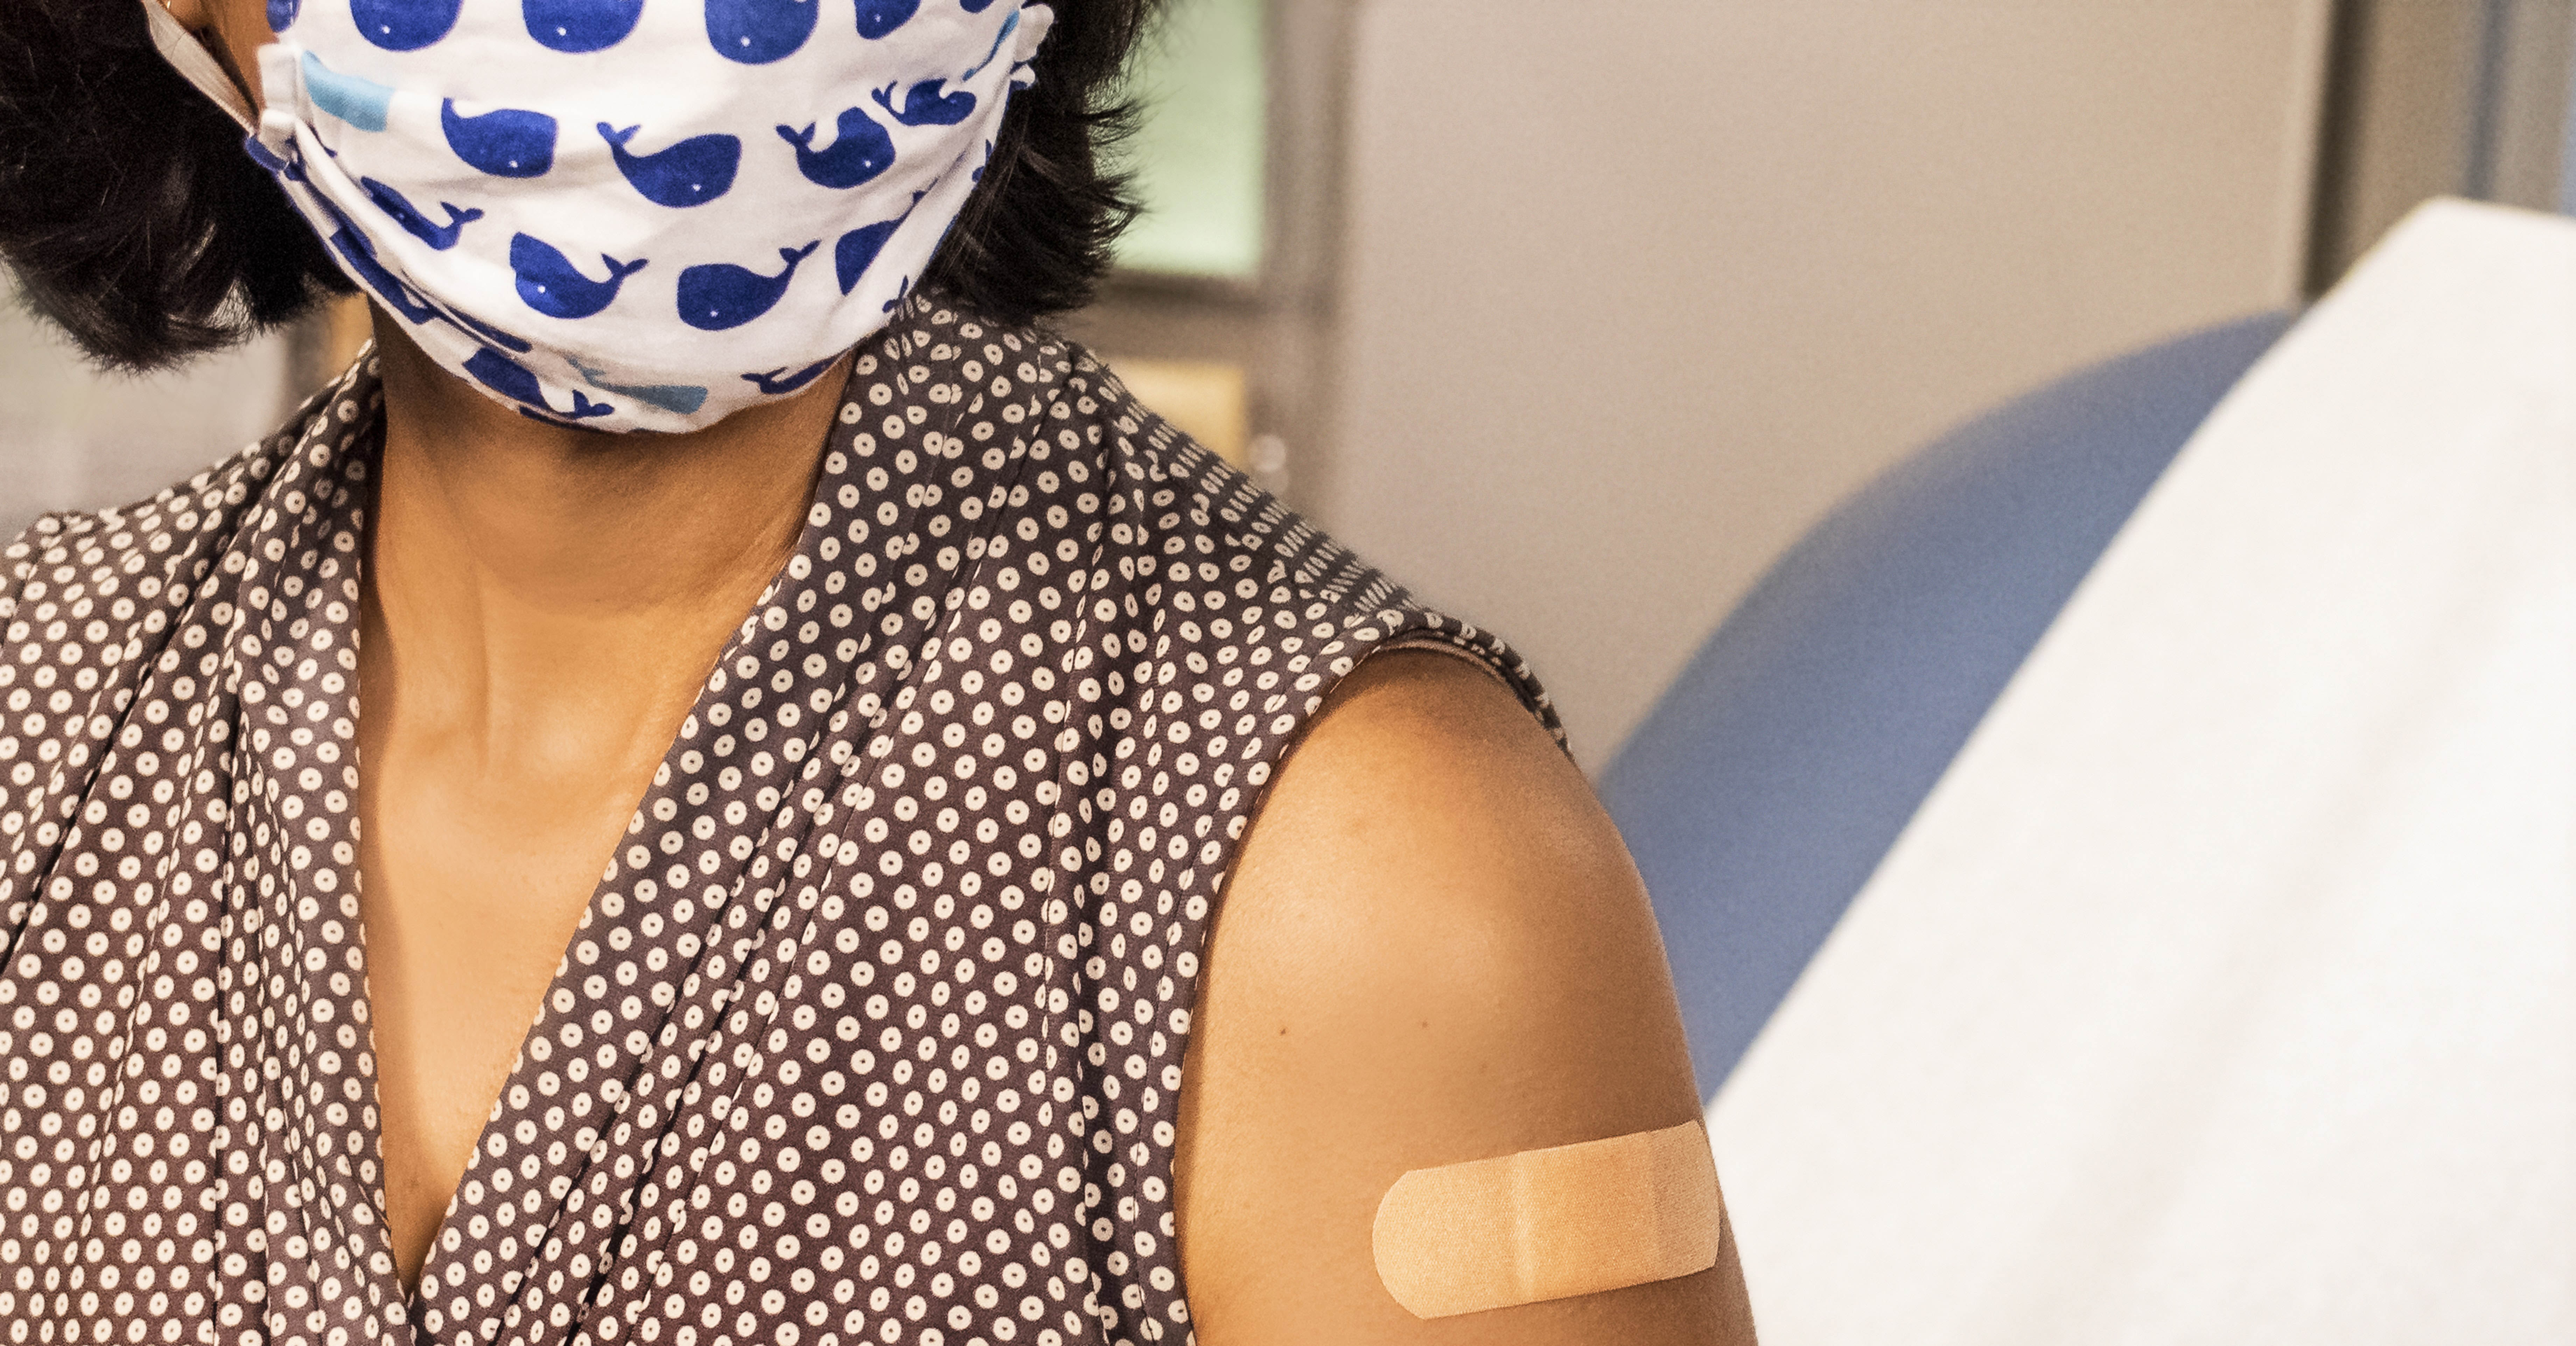 A woman wearing a polka dot top receives a vaccination.